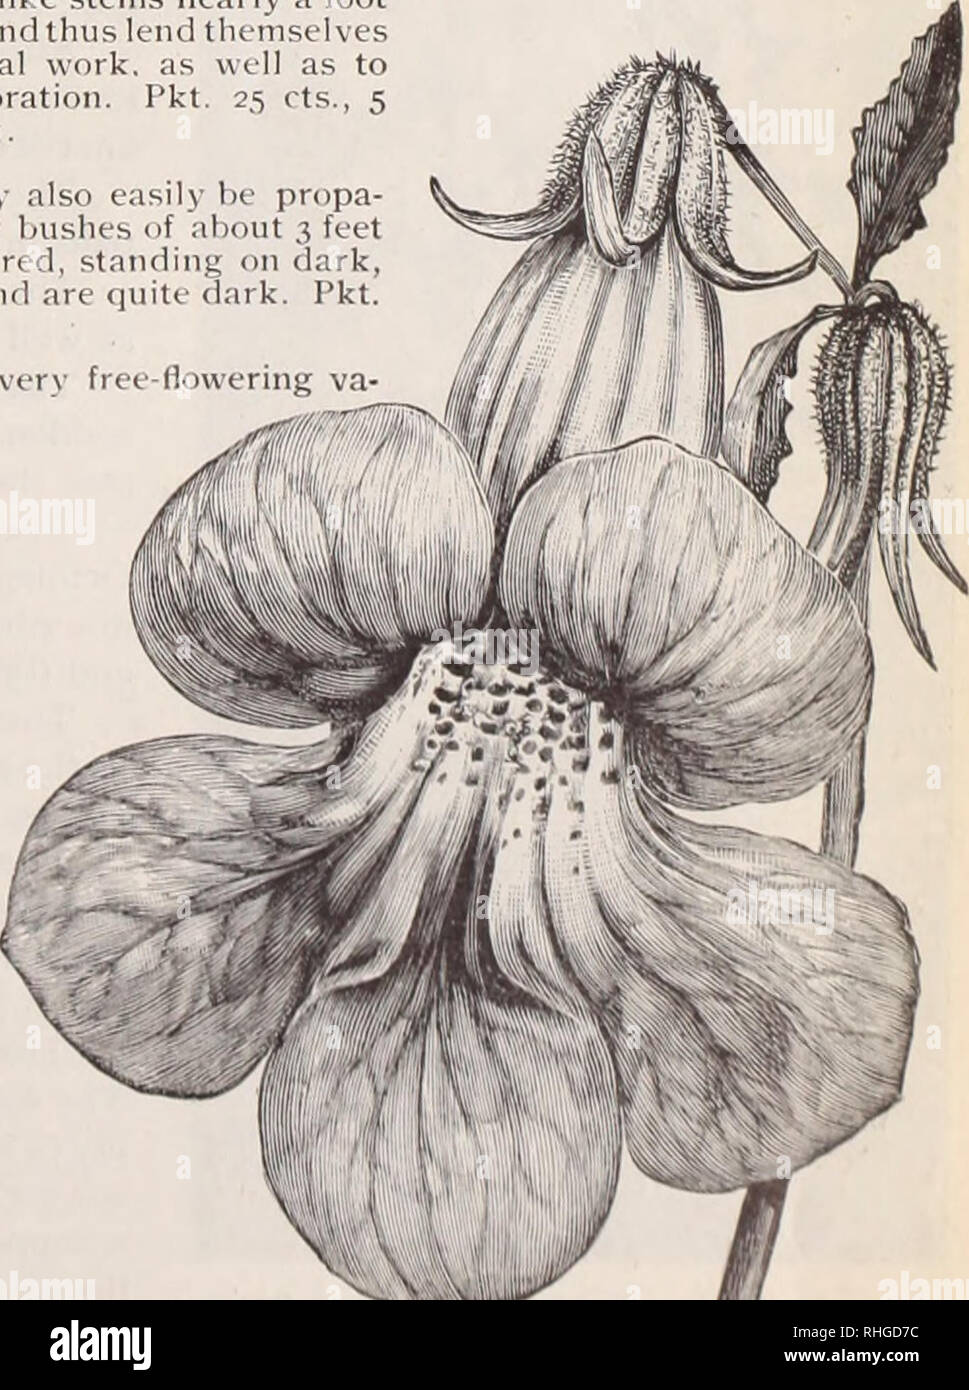 . Boddington's quality bulbs, seeds and plants / Arthur T. Boddington.. Nursery Catalogue. Scabious, The Bride. long wire-like stems nearly a foot in Ifntjtli and thus lend themselves to all floral work, as well as to floral decoration. Pkt. 25 cts., 5 pkts. for$i. Salvia. Pittieri. (H.H.P.) This pretty Salvia, introduced some years ago, may also easily be propa- 'â gated by seed. It forms well-branched and compact growing bushes of about 3 feet high and stands all the summer in full bloom. The flowers of a vivid cochineal-red, standing on dark, rather bluish hued stems, and even the cups in w Stock Photo